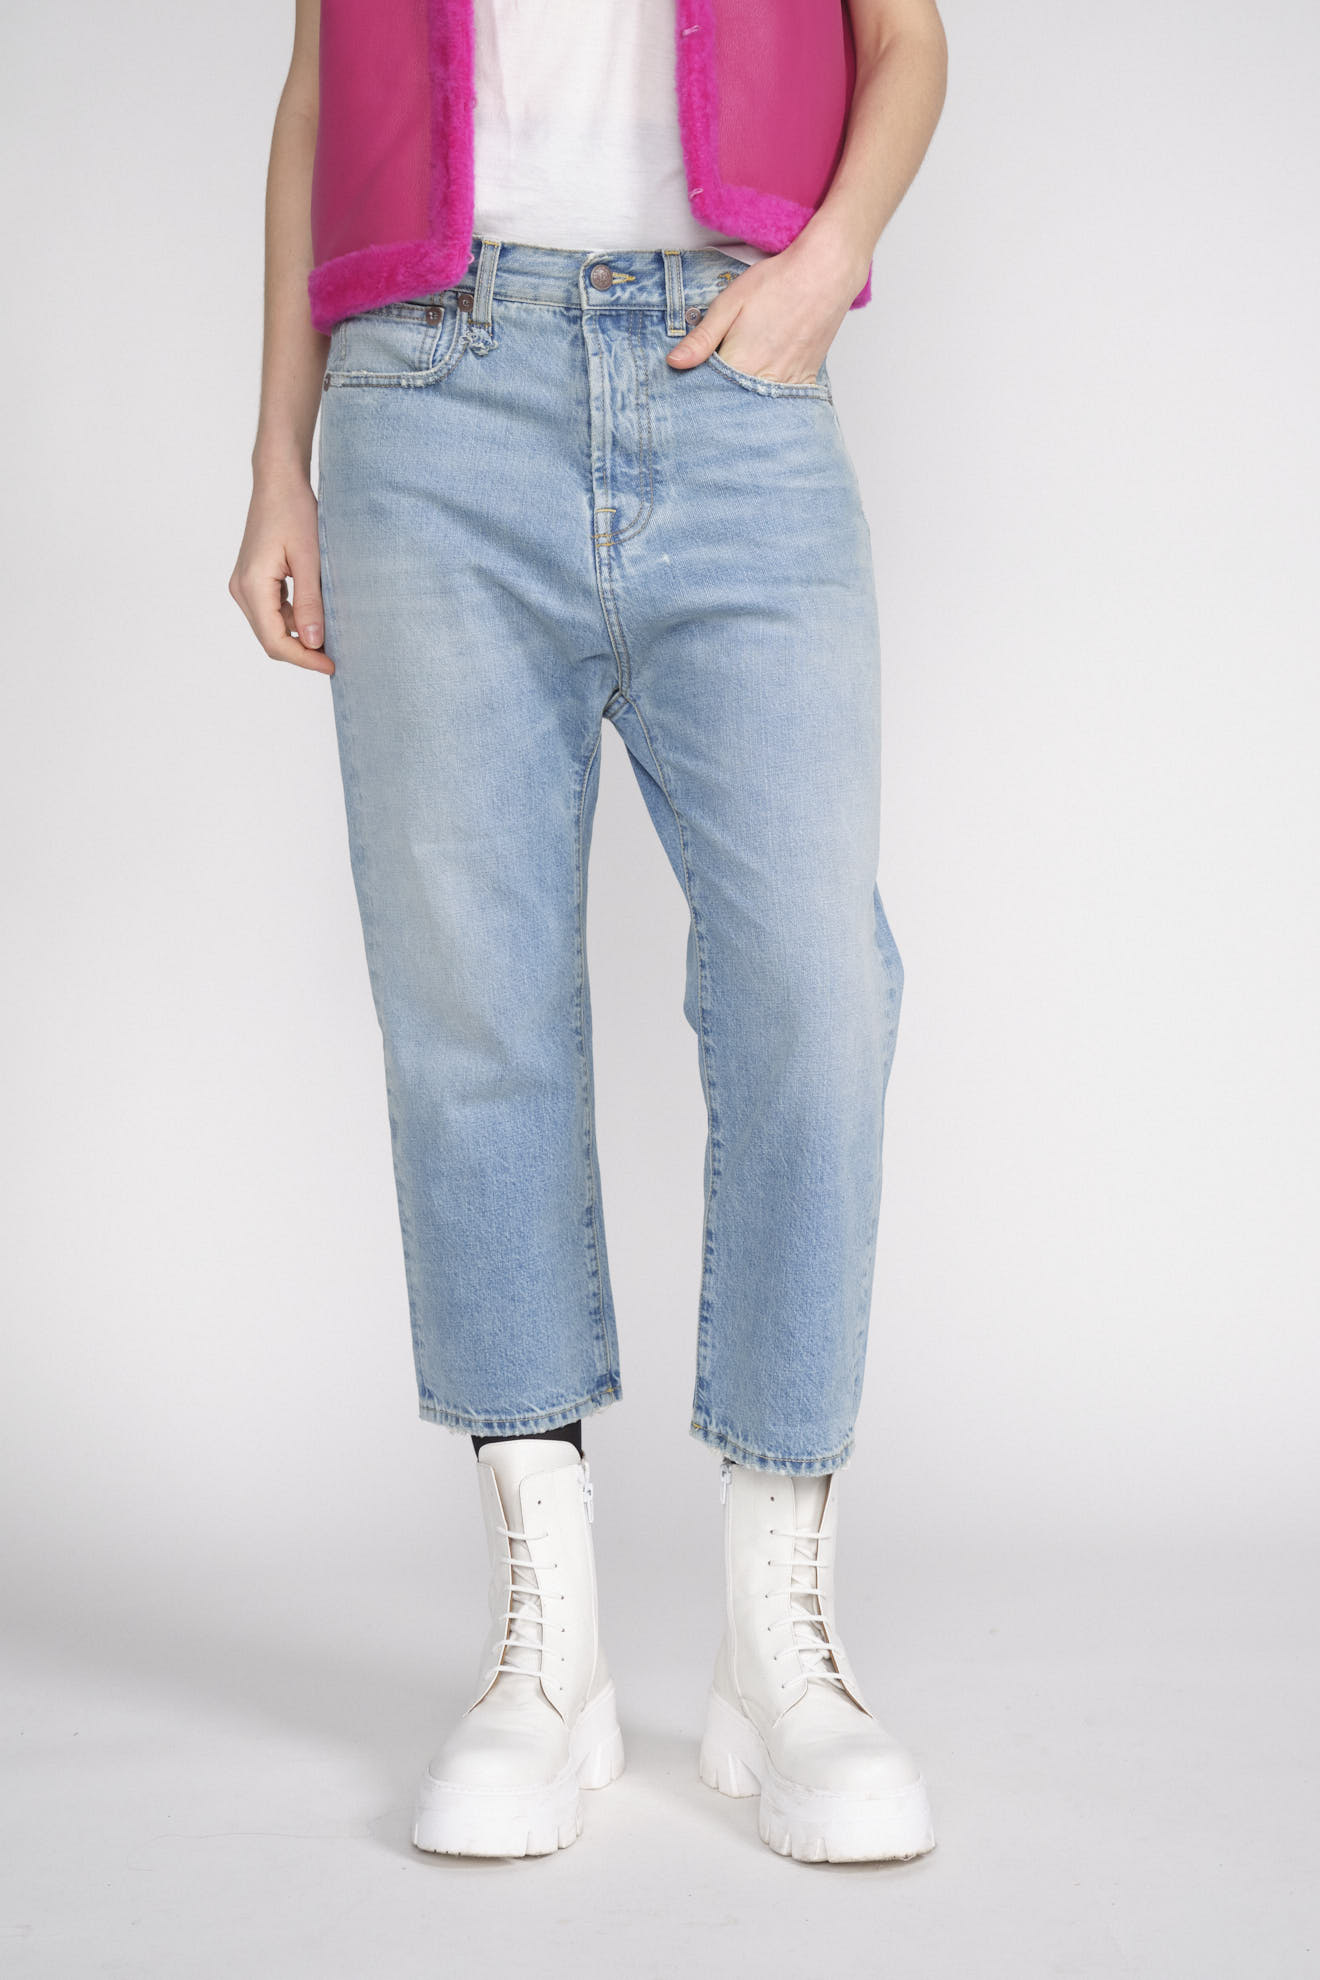 R13 Tailored Drop - Low crotch jeans blue 25